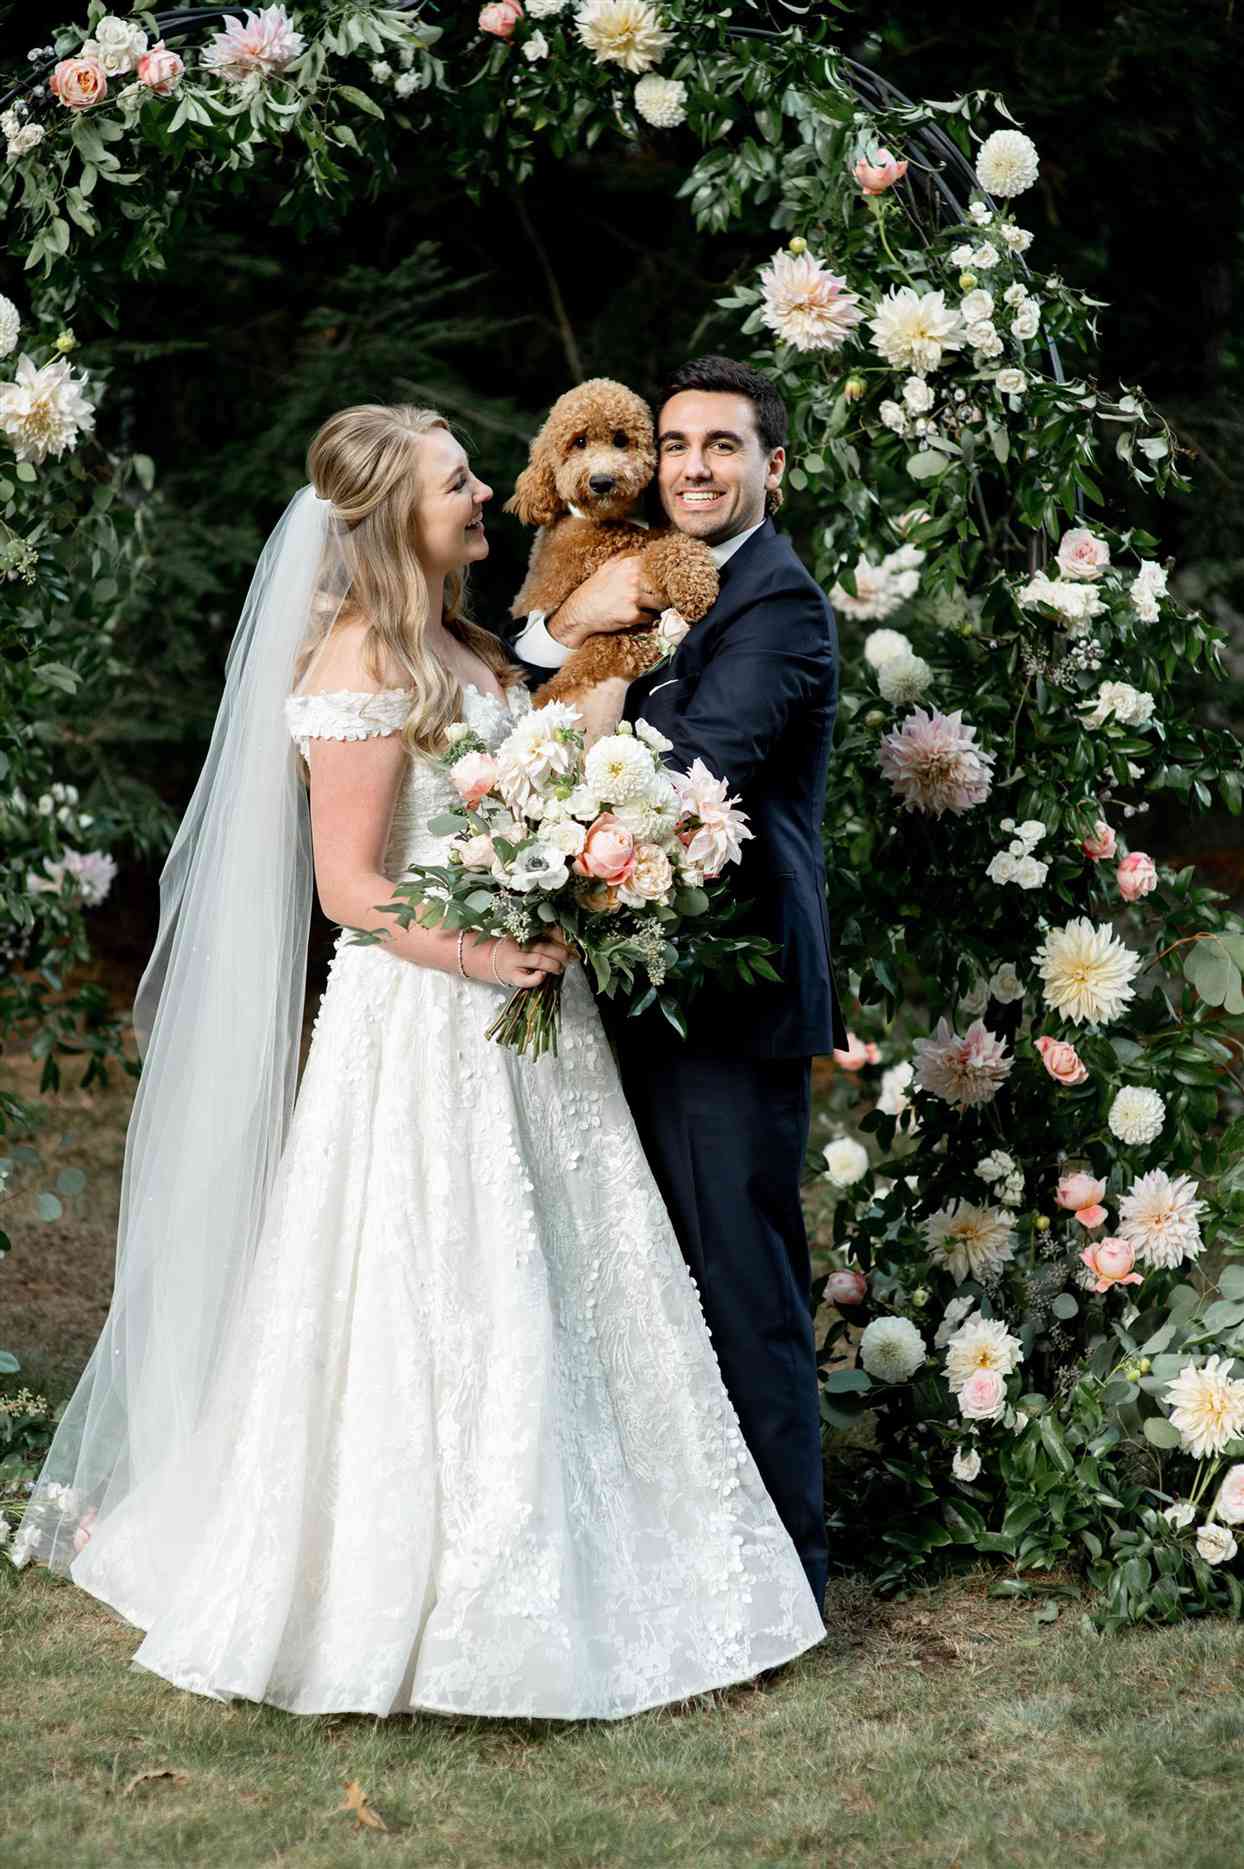 Bride and groom holding dog